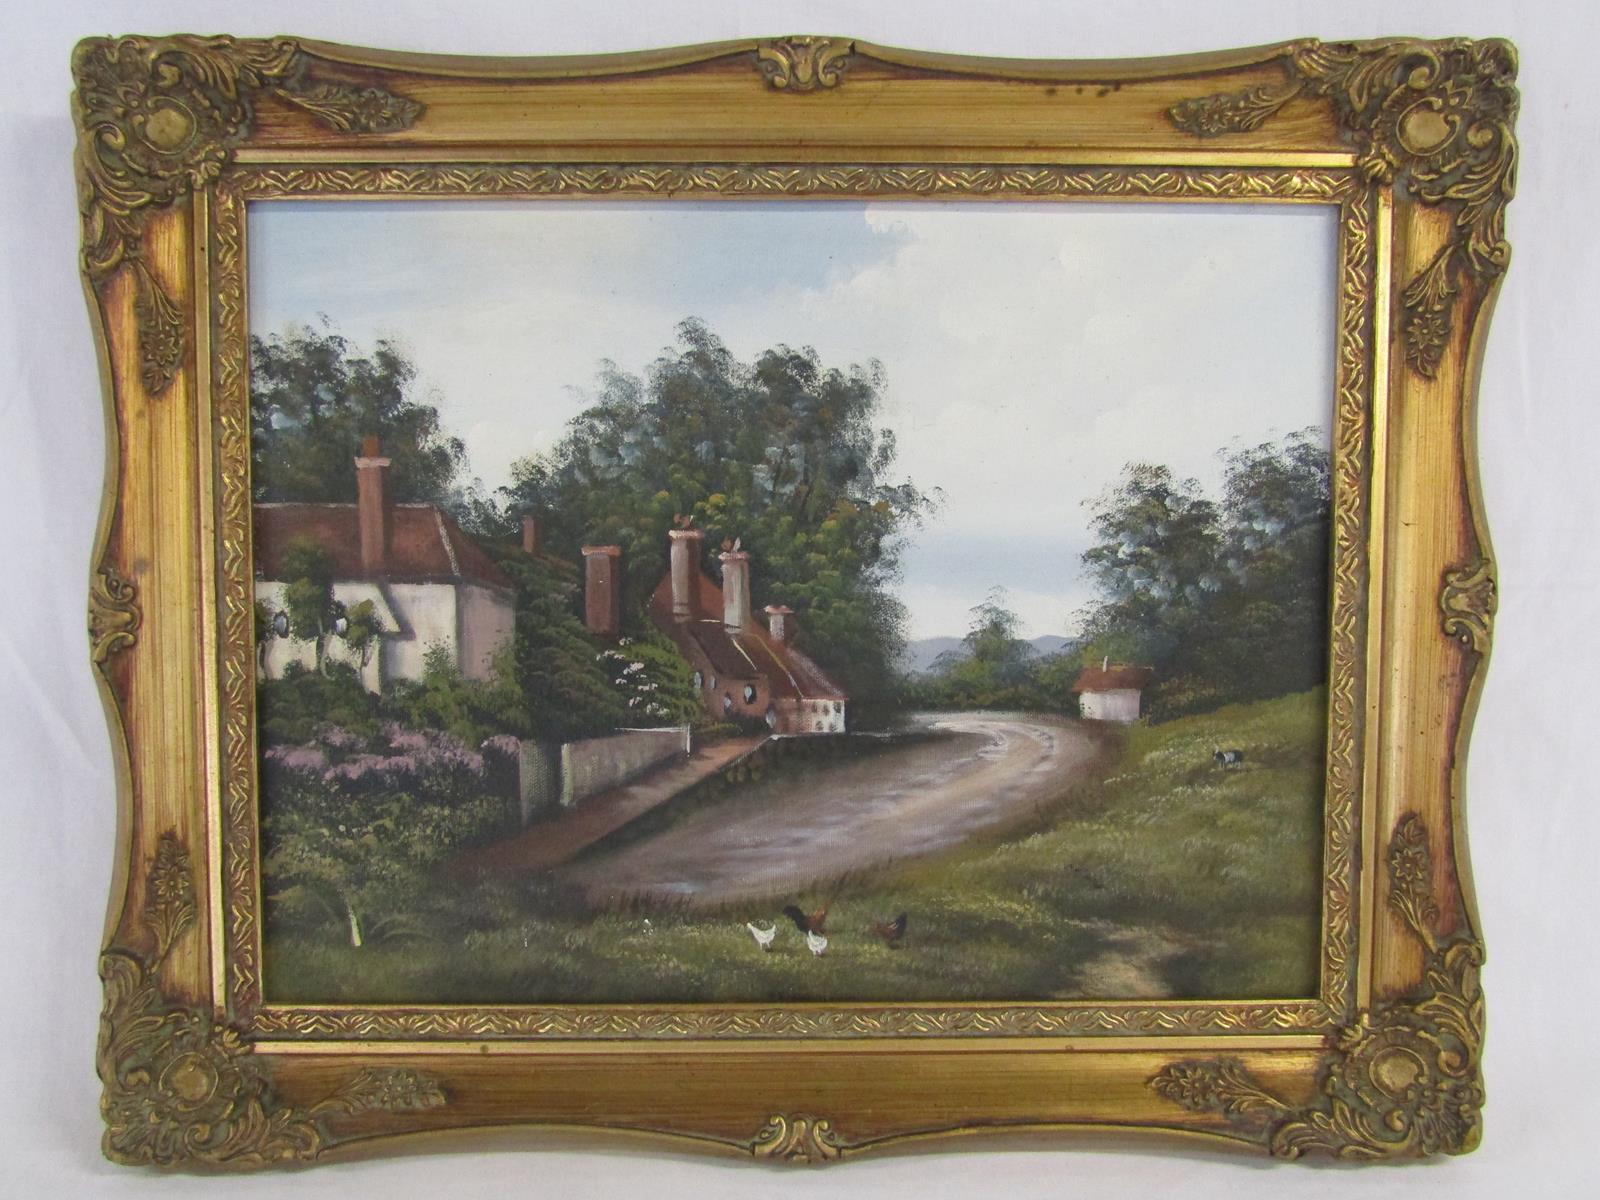 Framed oil on board, unsigned, depicting country road and cottages - approx. 49.5cm x 39cm - Image 2 of 3